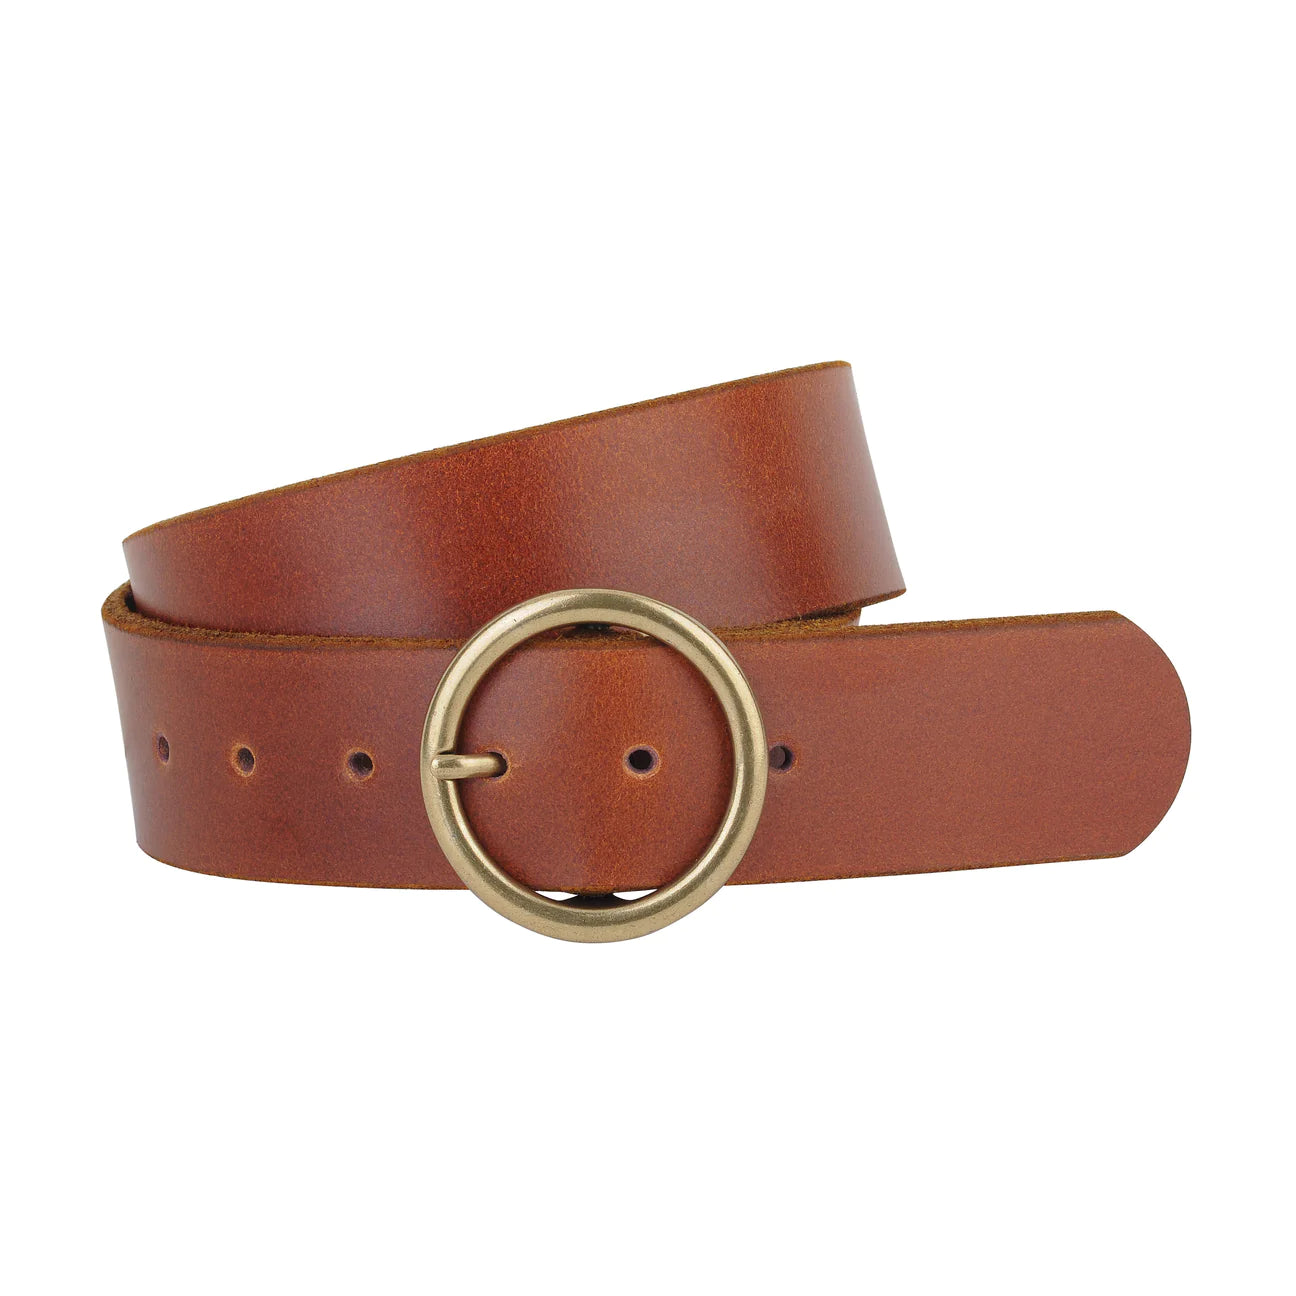 Wide Belt with Copper Tone Buckle - Tan